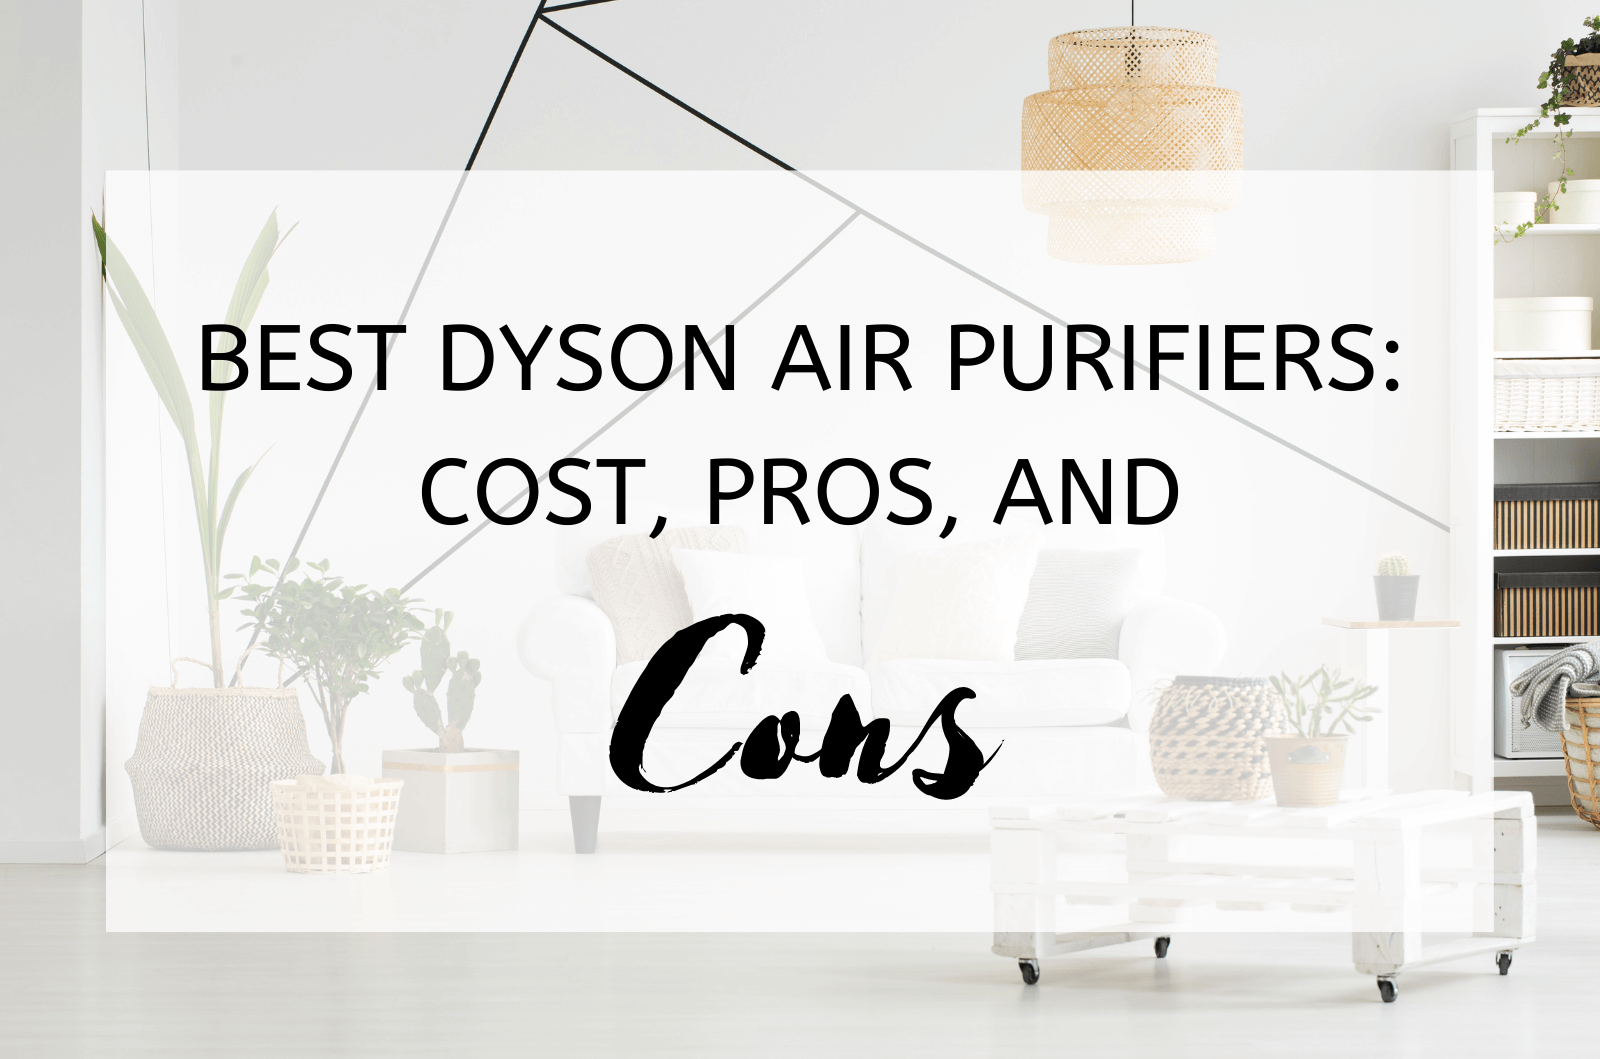 Best Dyson Air Purifiers Cost, Pros, And Cons (1)